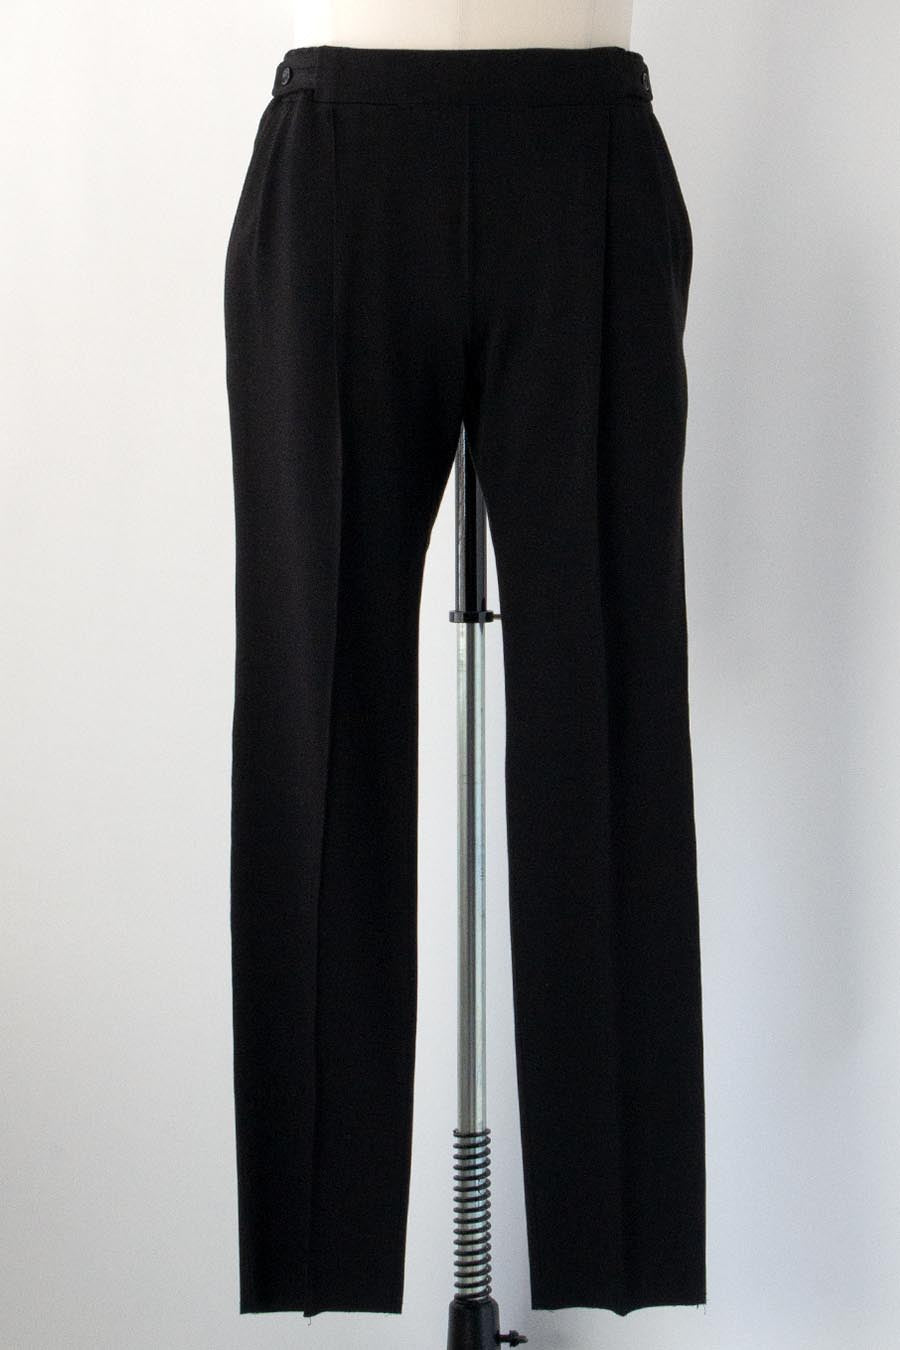 【RANMAKER】PONTE ROMA PLEATED TROUSERS